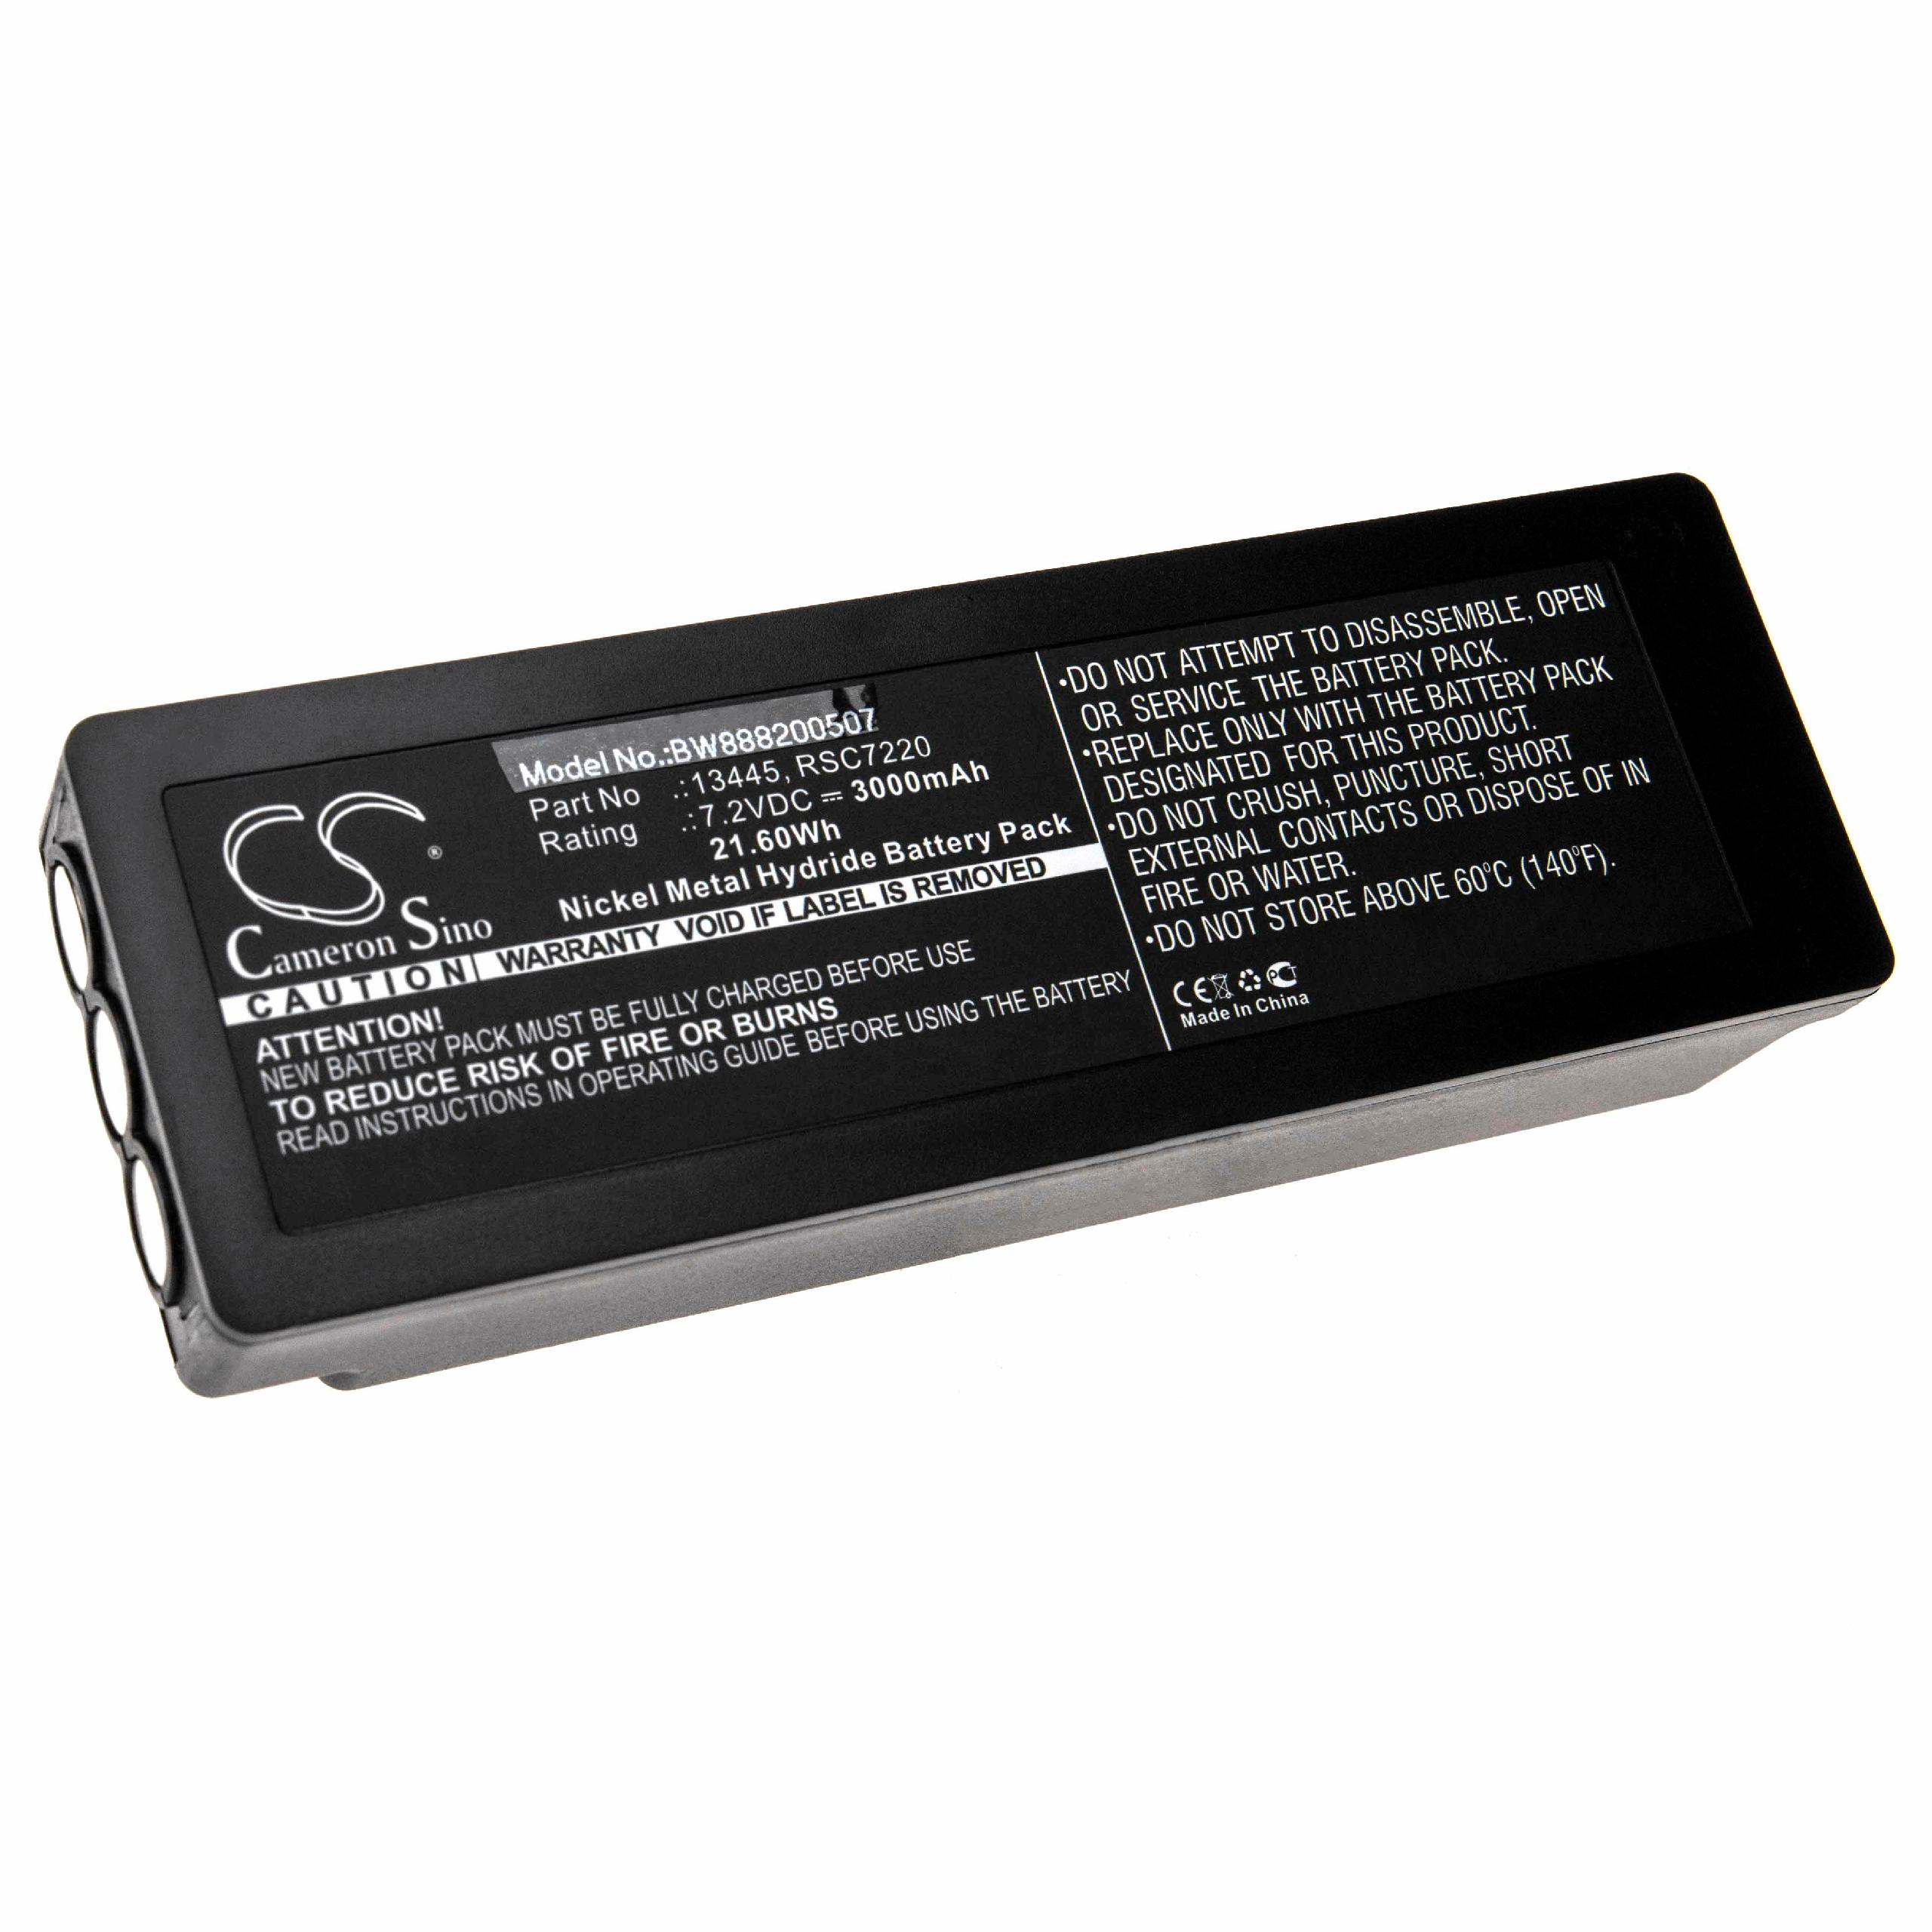 Industrial Remote Control Battery Replacement for Palfinger Scanreco 1026, 16131, 13445 - 3000mAh 7.2V NiMH